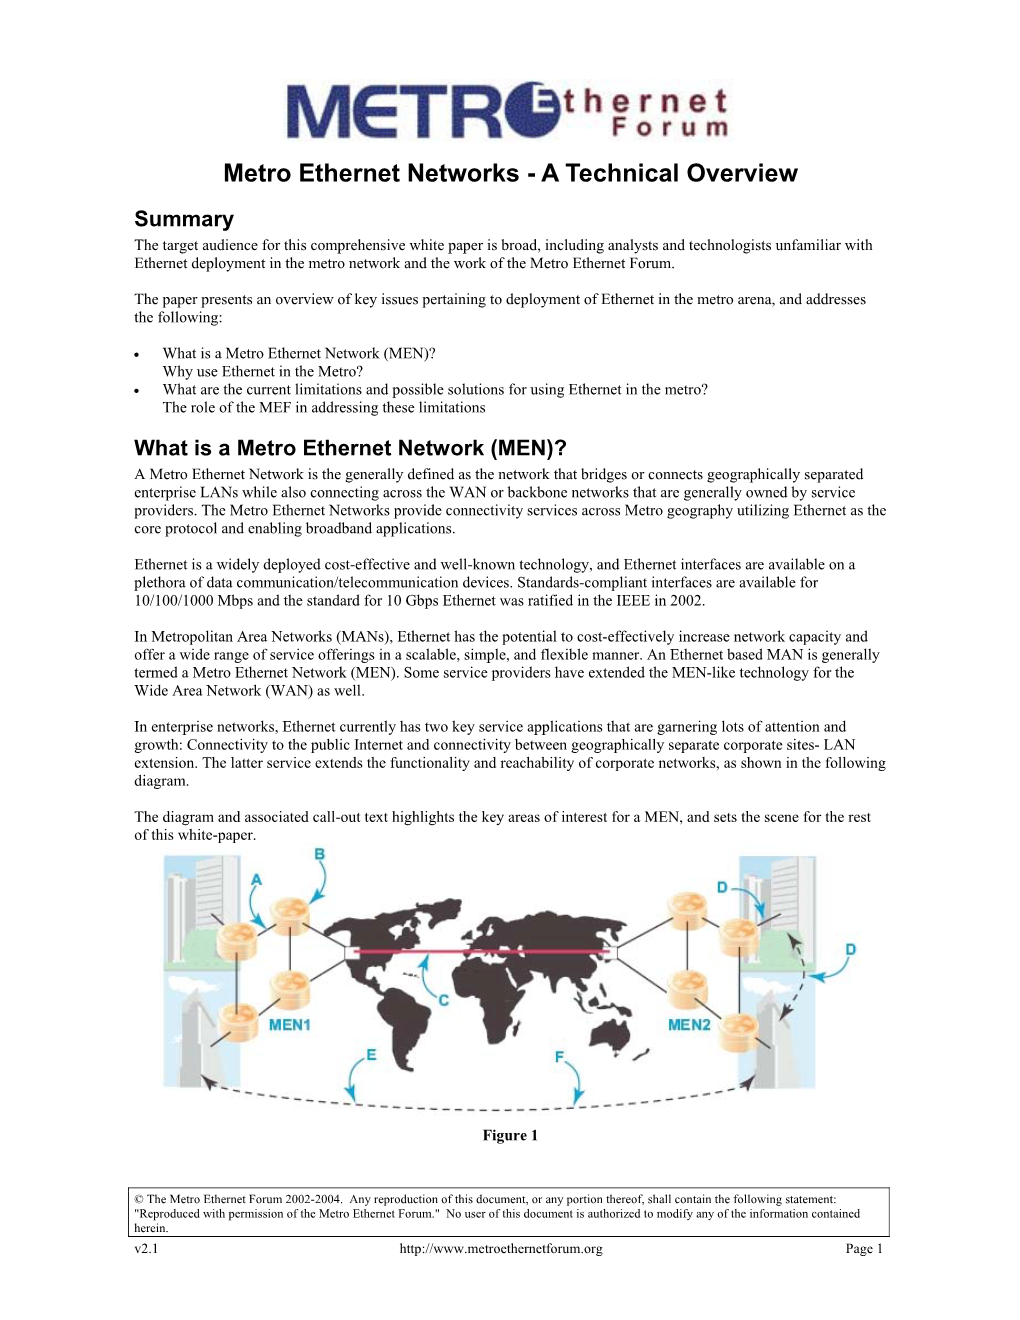 Metro Ethernet Networks - a Technical Overview